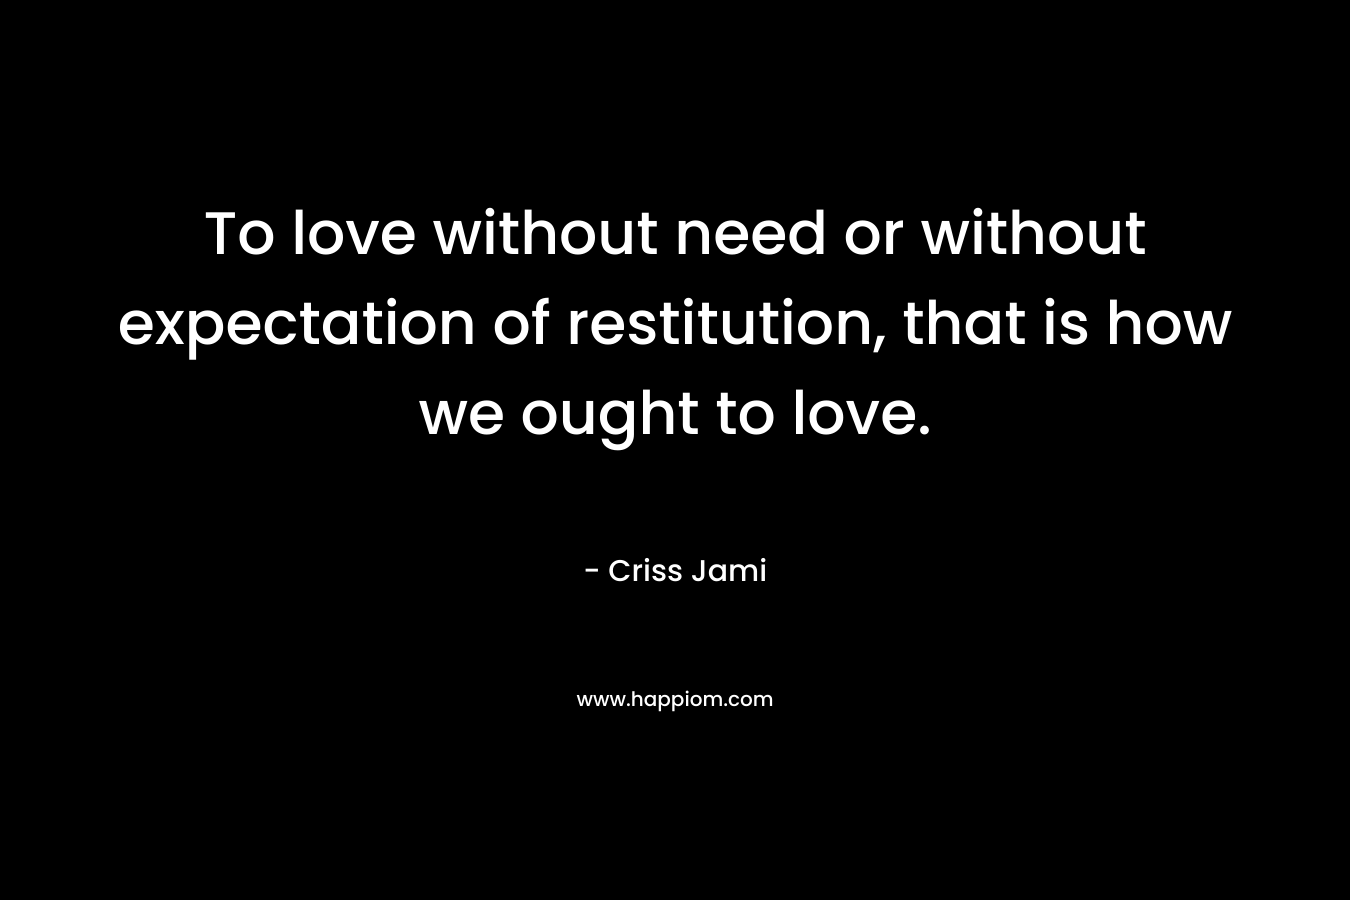 To love without need or without expectation of restitution, that is how we ought to love.